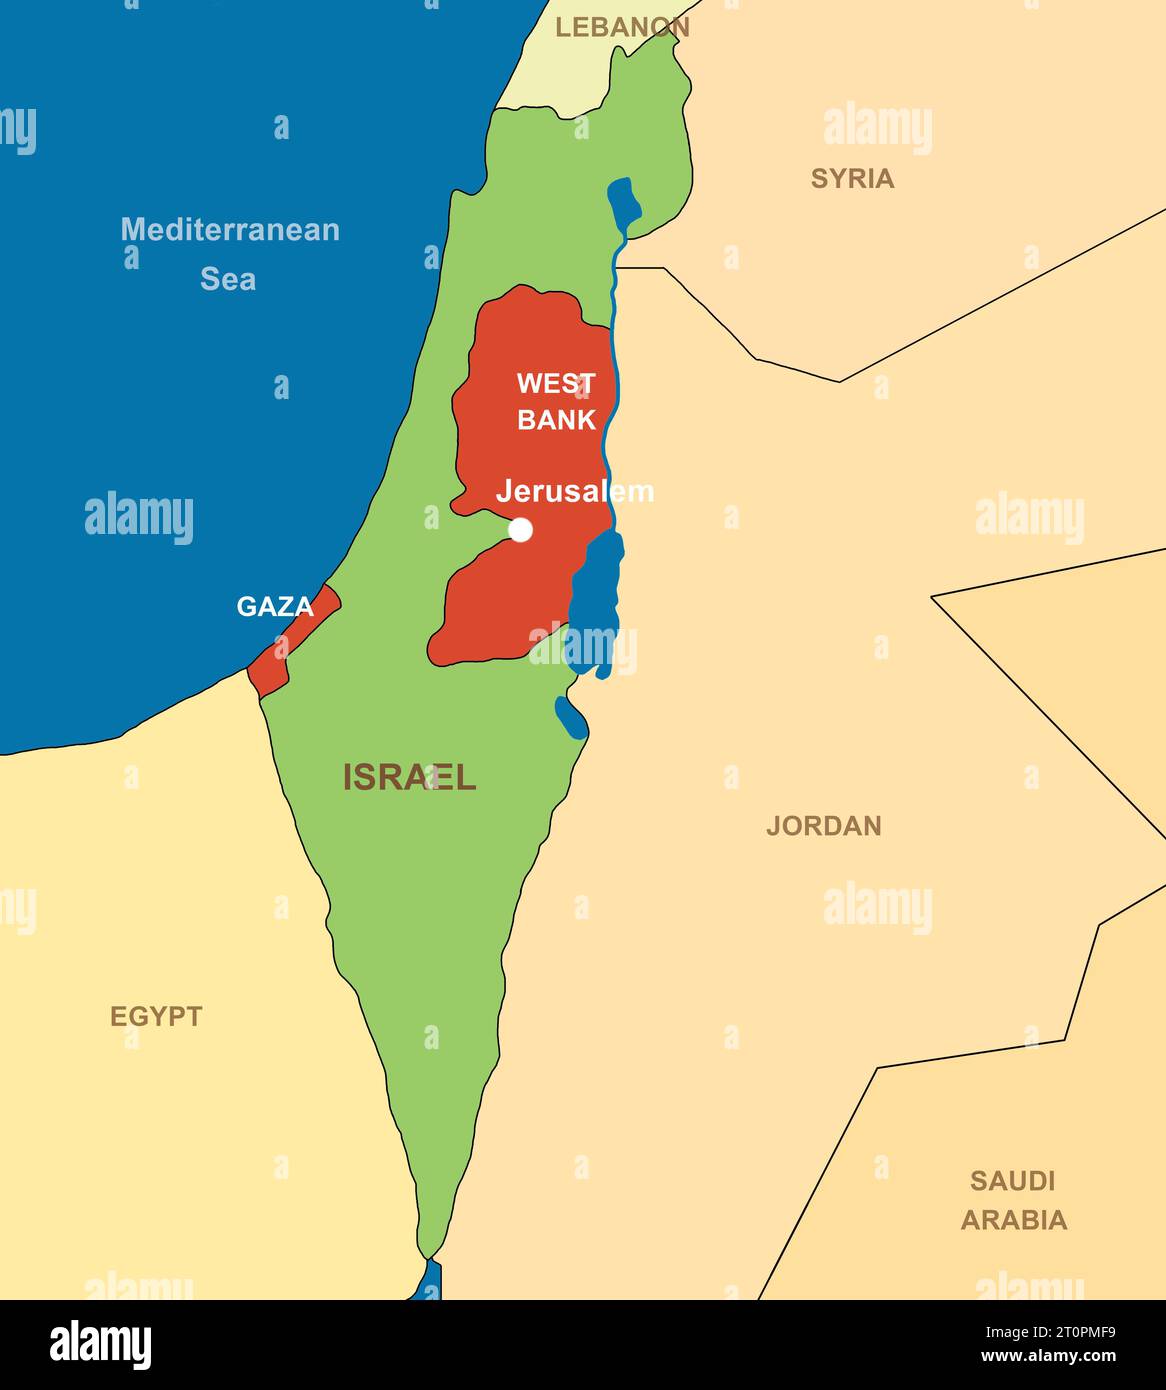 Israel on outline map, Middle East with Egypt, Syria, Lebanon, Jordan and Saudi Arabia. Israeli and Palestinian territories, Gaza and West Bank. Theme Stock Photo